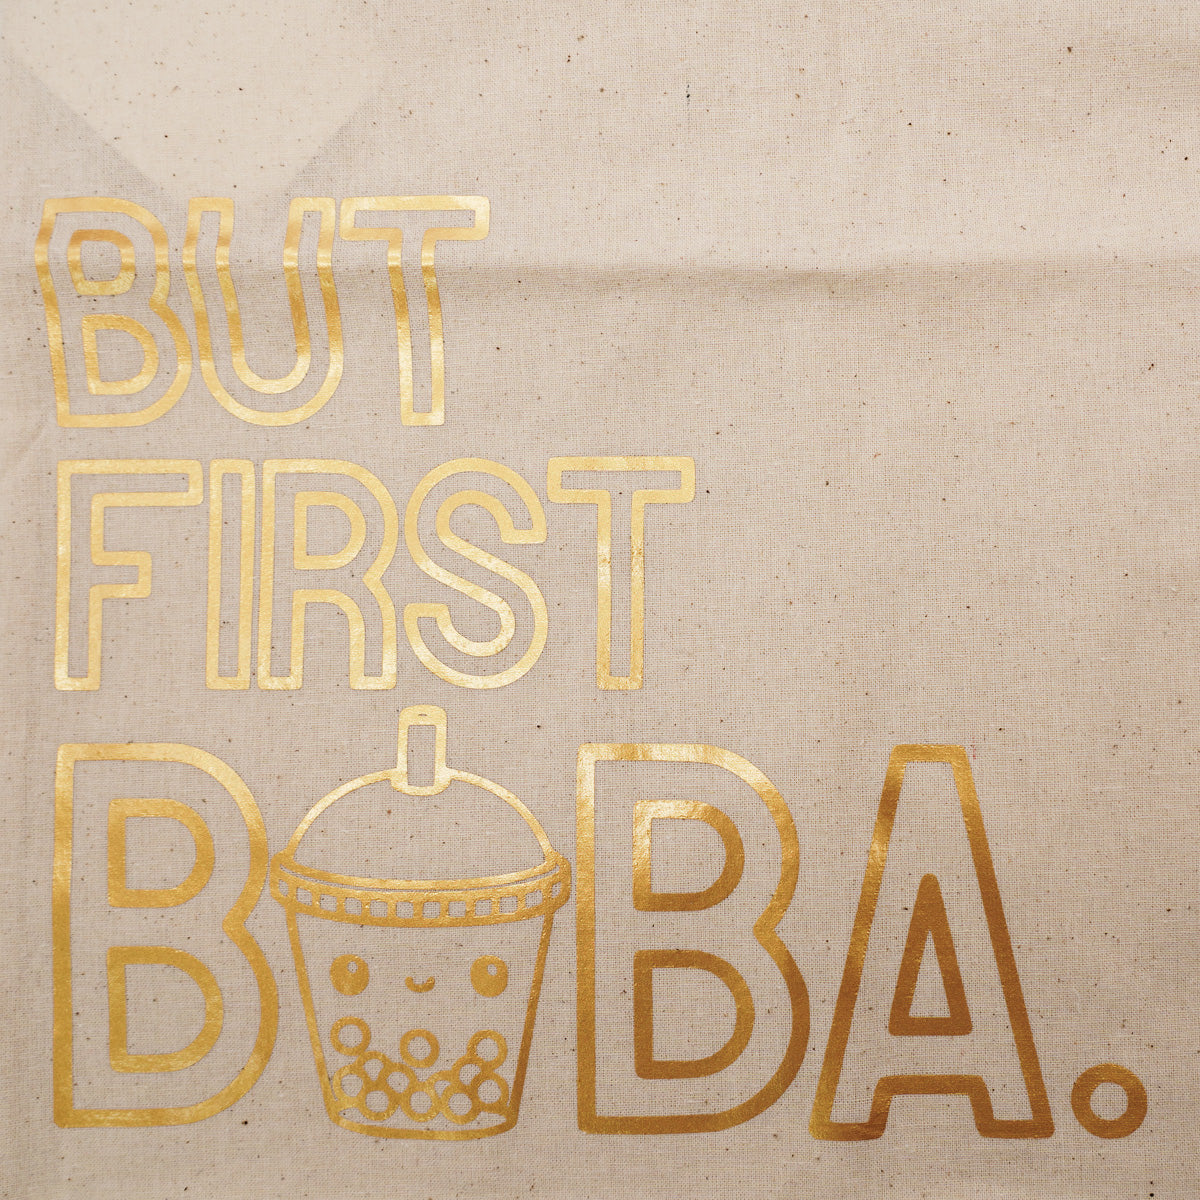 But First Boba. - 100% Cotton Heat Pressed Tote